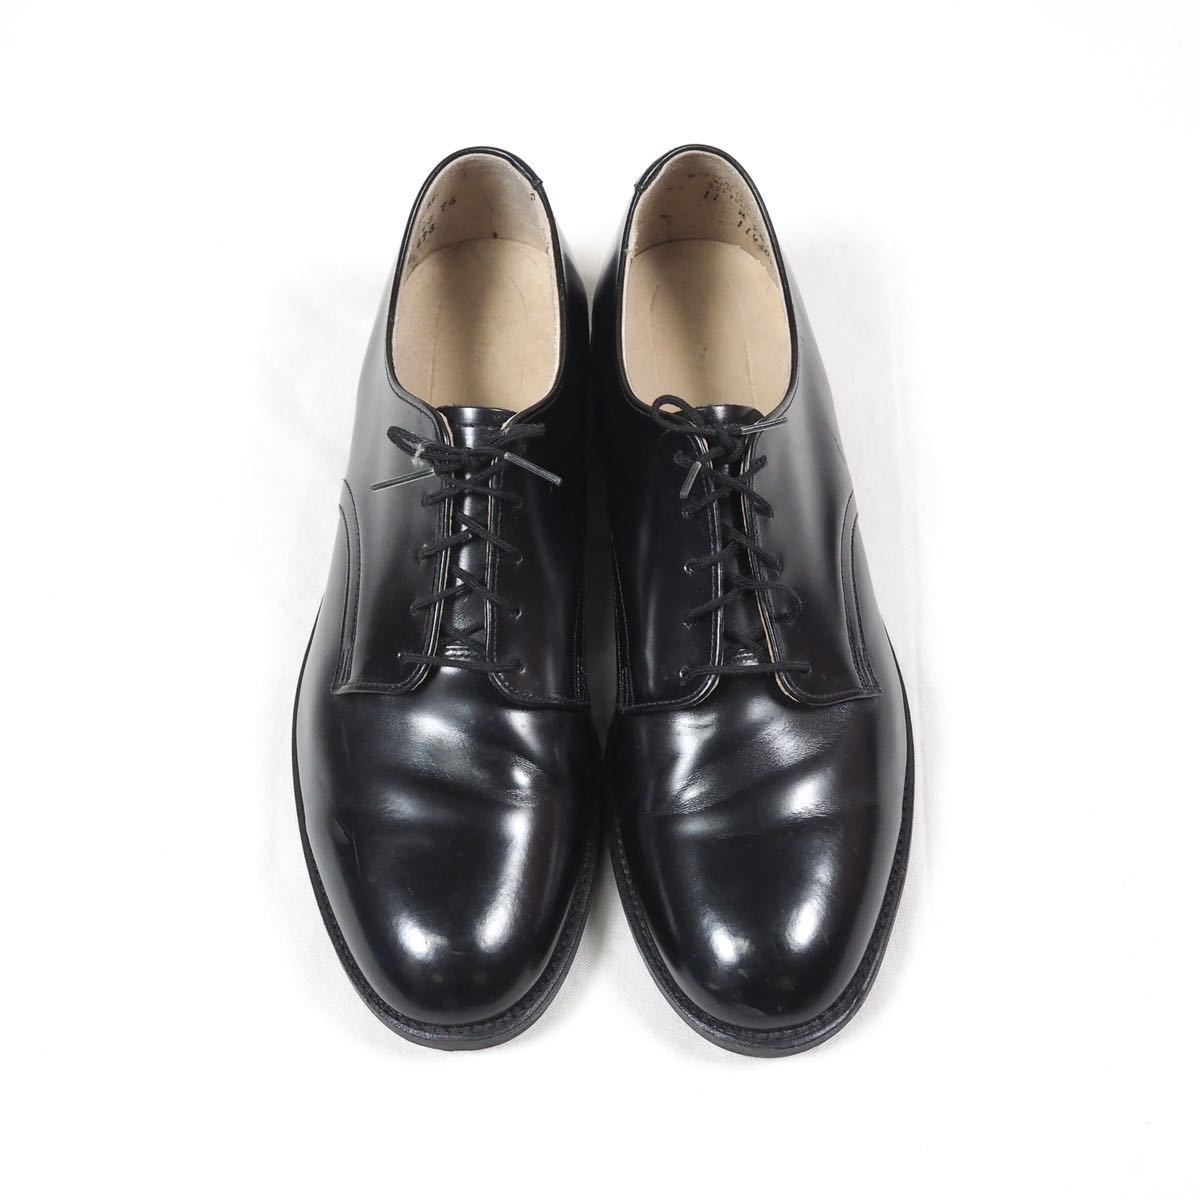 【MINT CONDITION】U.S.NAVY oxford leather service shoes 11R WOLVERINE WORLD WIDE INC /アメリカ軍 レザー サービスシューズ